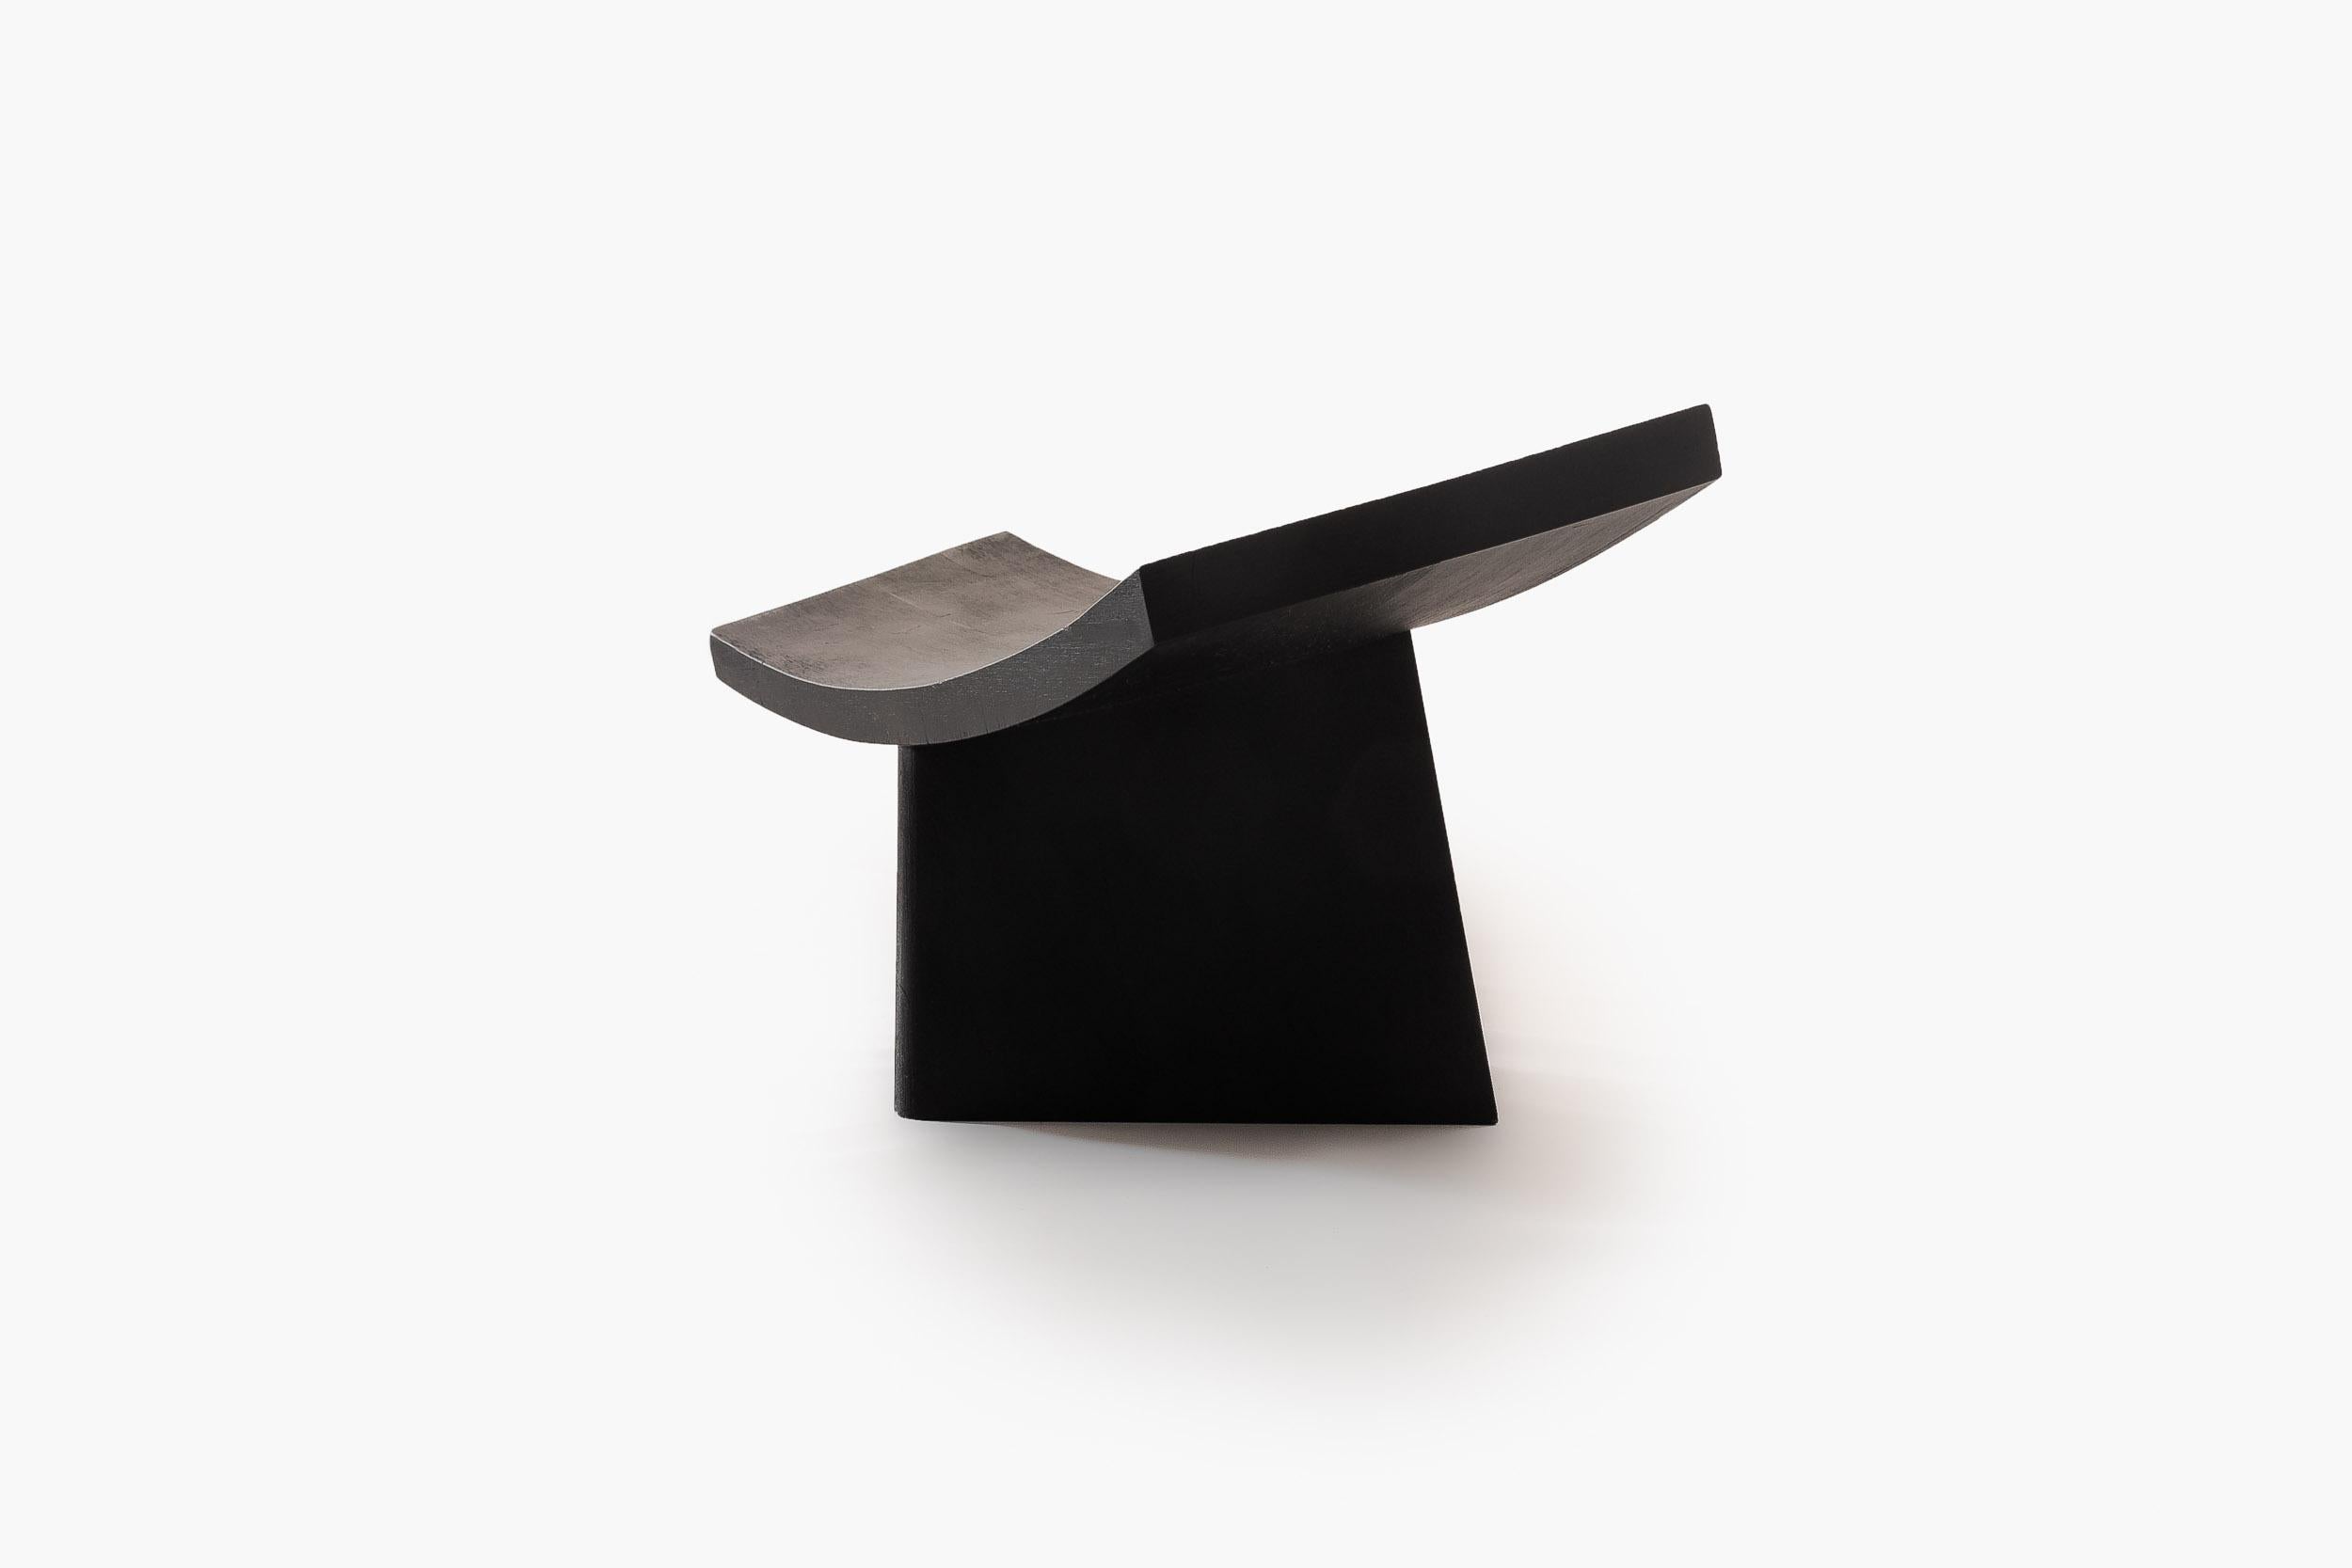 Black Stool Coba by Camilo Andres Rodriguez Marquez (aka CarmWorks)

Solid oak or cedar / Burnt wood or natural

Optional textile or leather seat can be added with an additional cost 

Suitable for outdoor use

Each piece is made to order